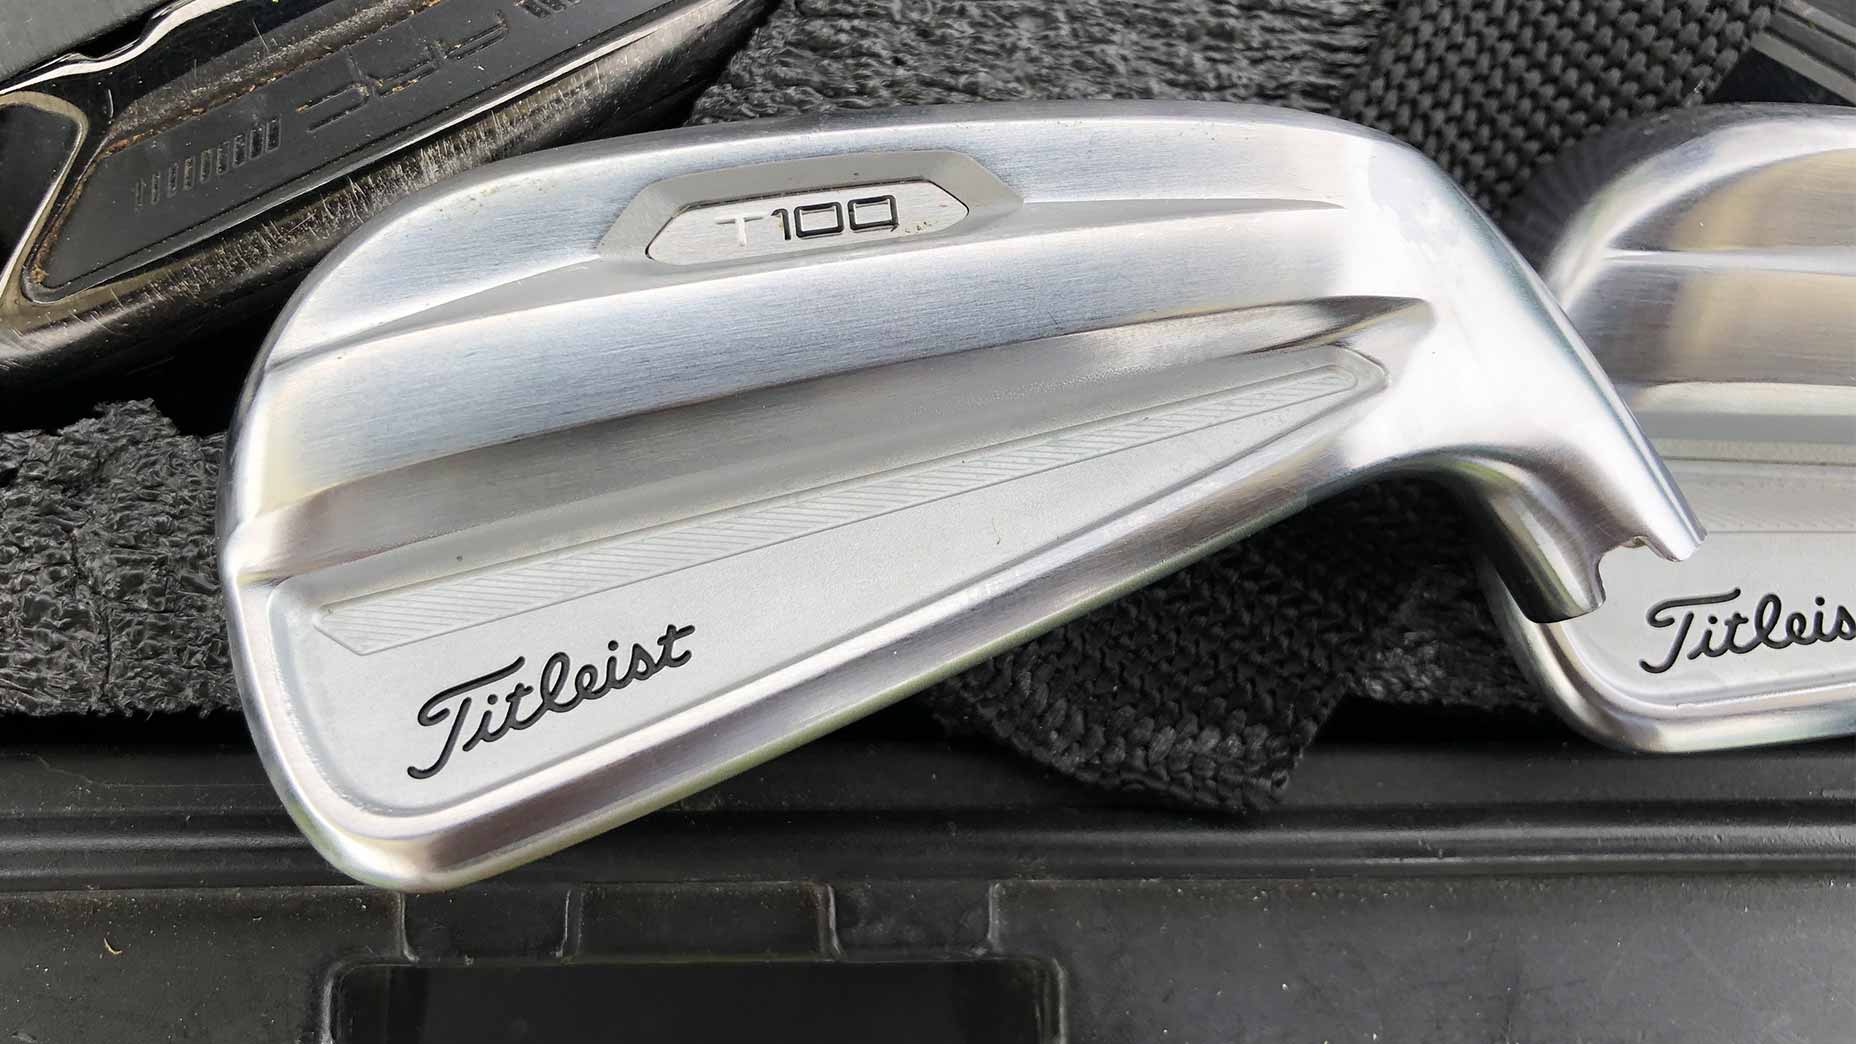 New Titleist T-Series Irons  Performance In Every Form 